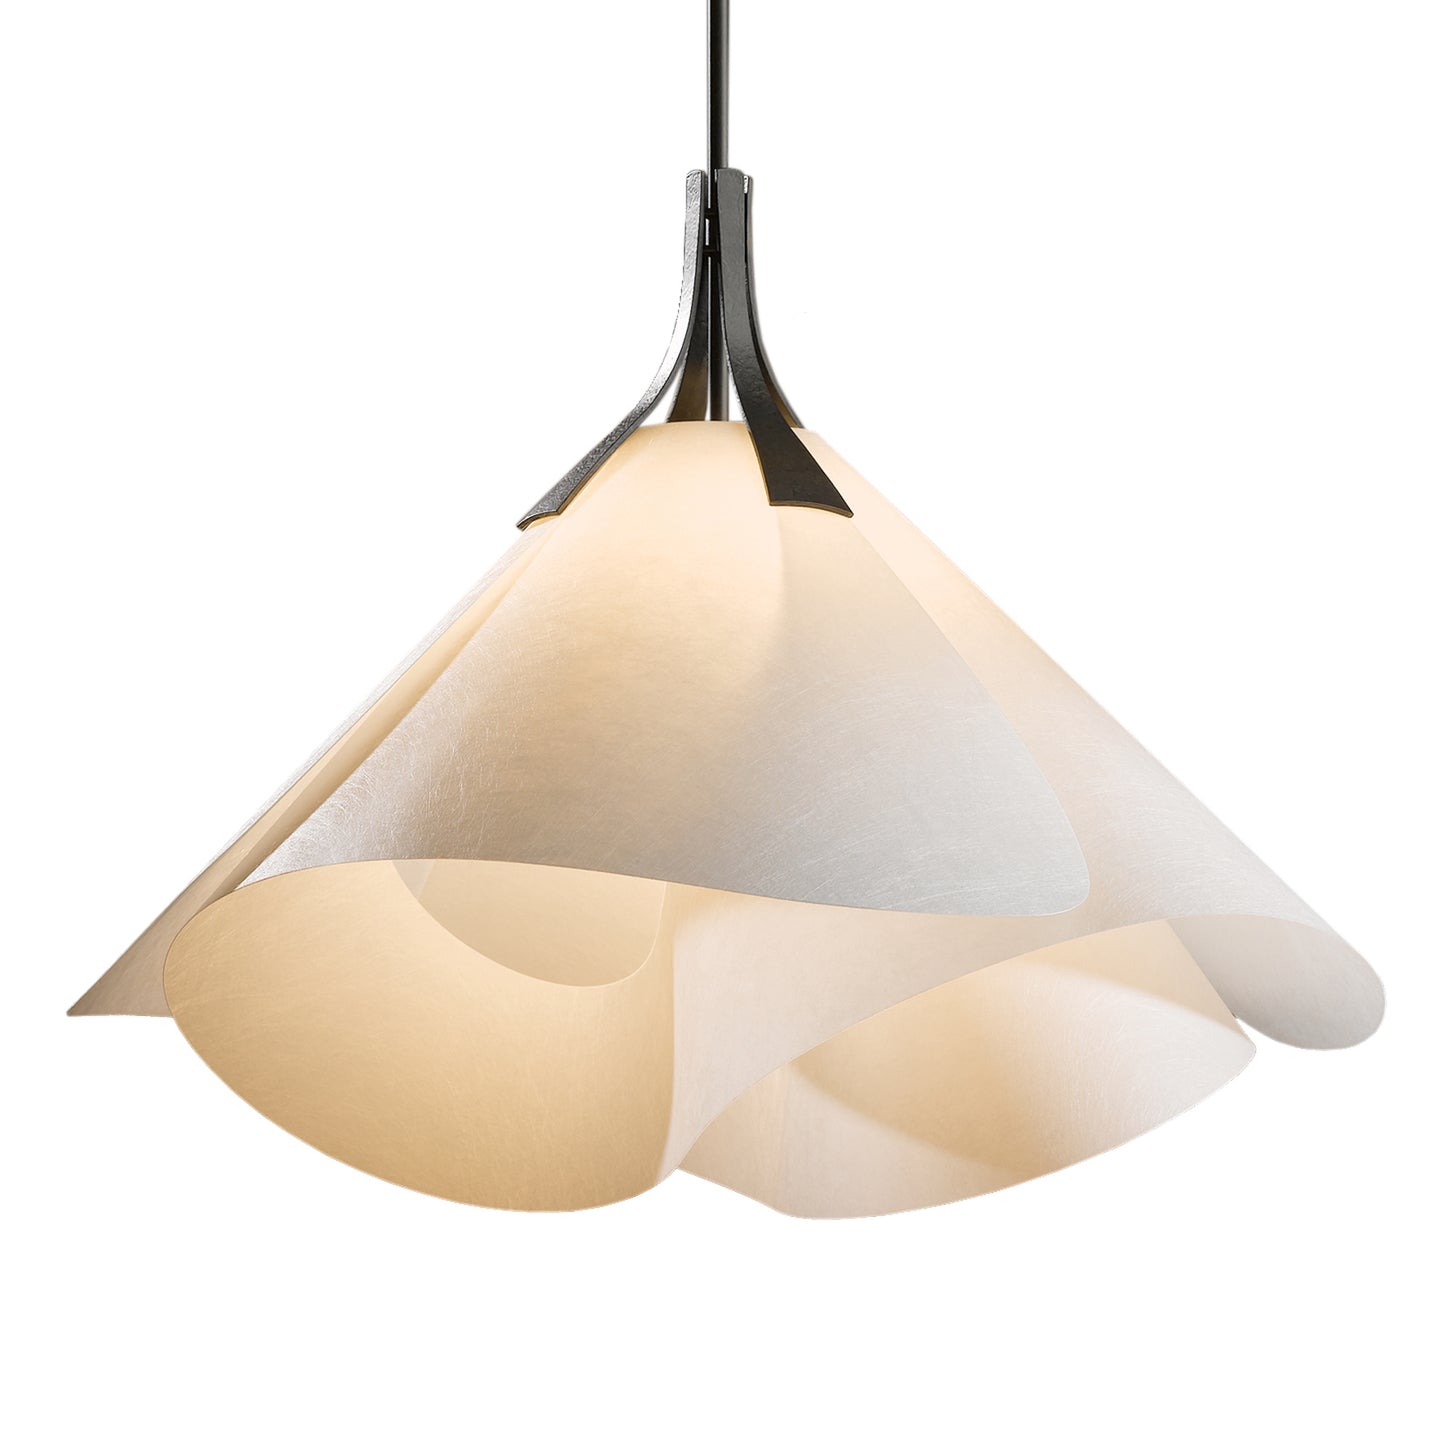 A modern Mobius Large Pendant with a Mobius Strip-inspired design and a white paper shade by Hubbardton Forge.